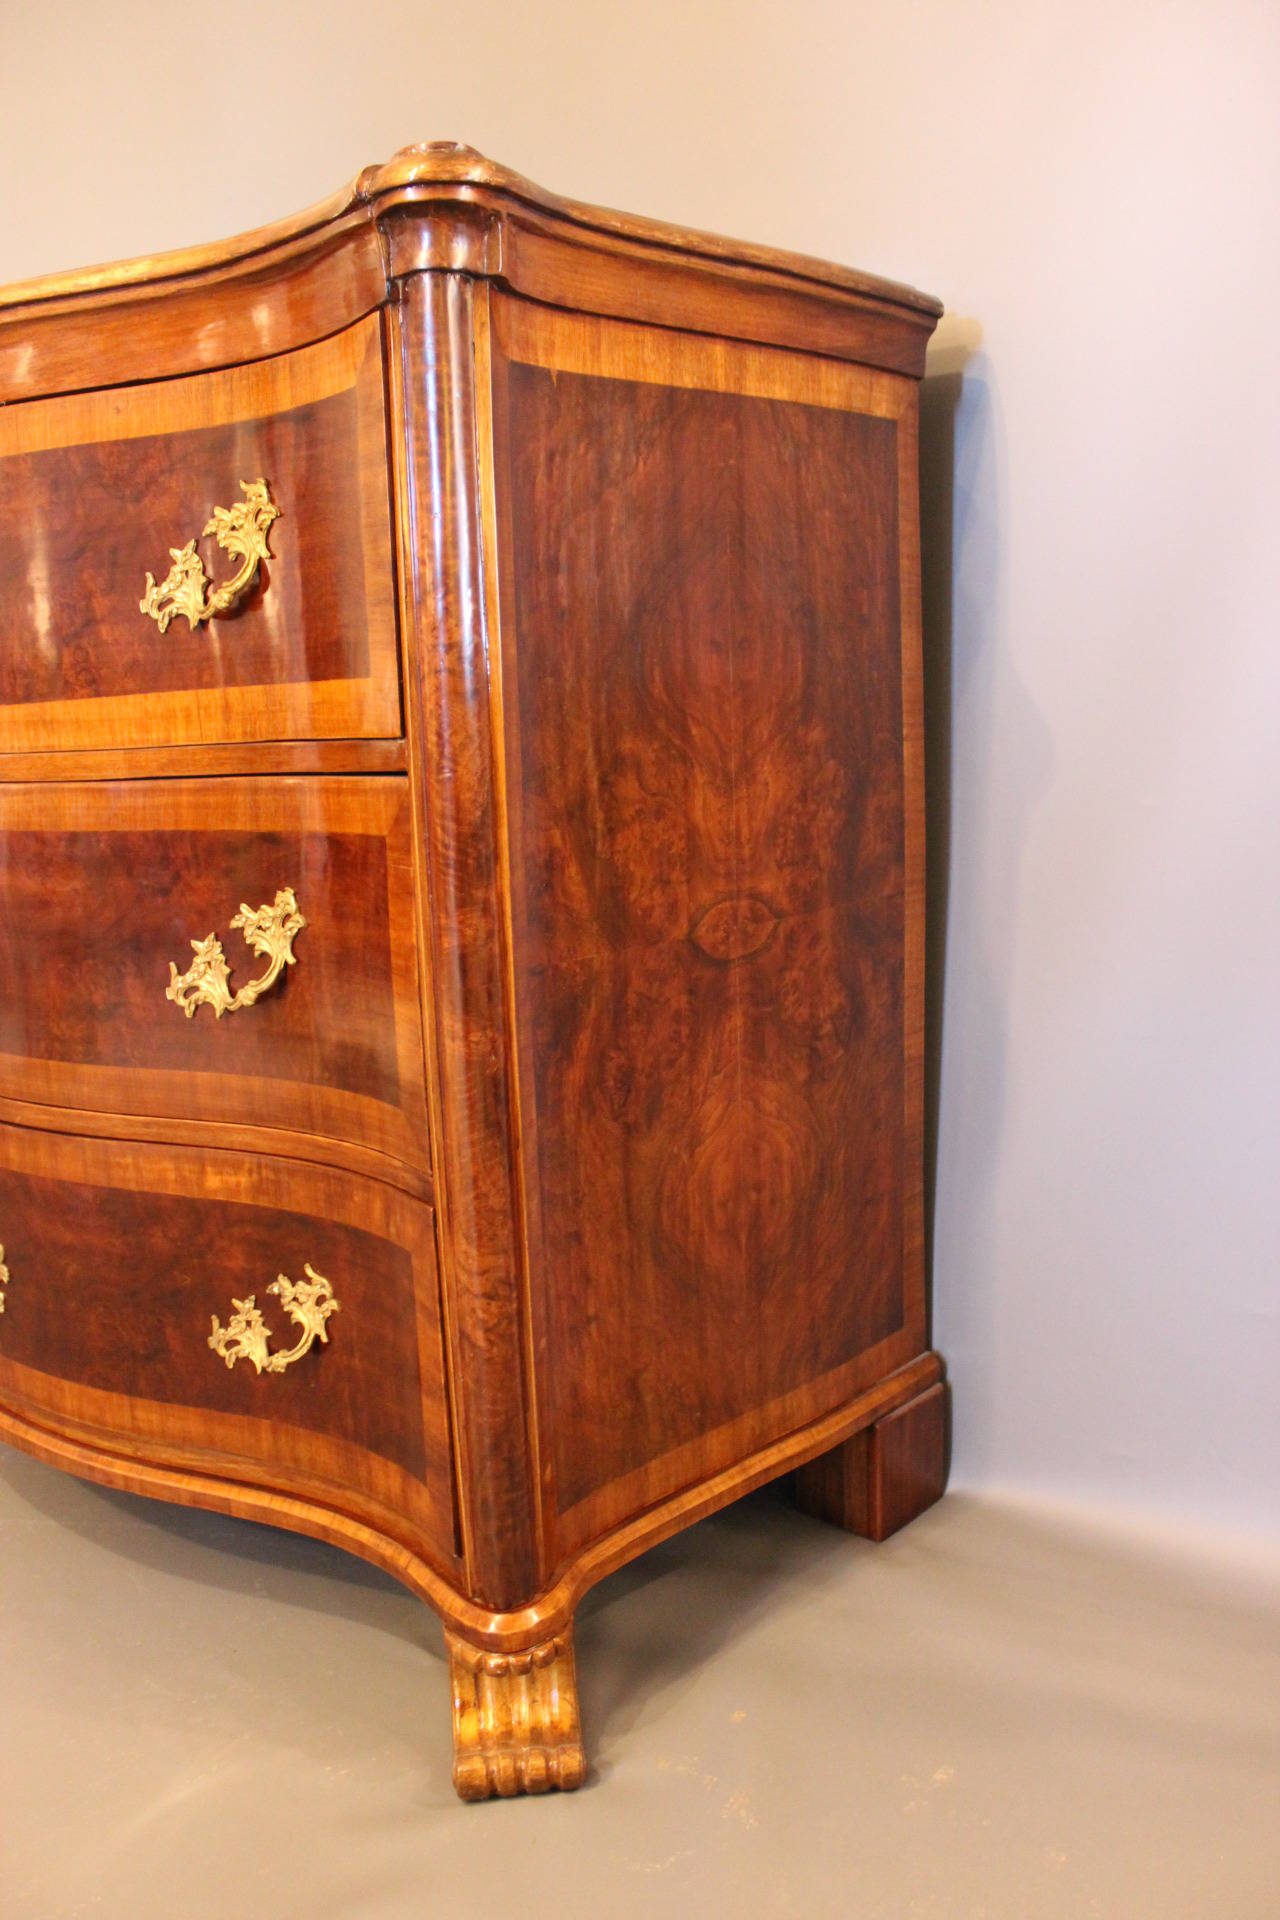 Danish Chest of Drawers from 1740 in Walnut, Manufactured in Denmark